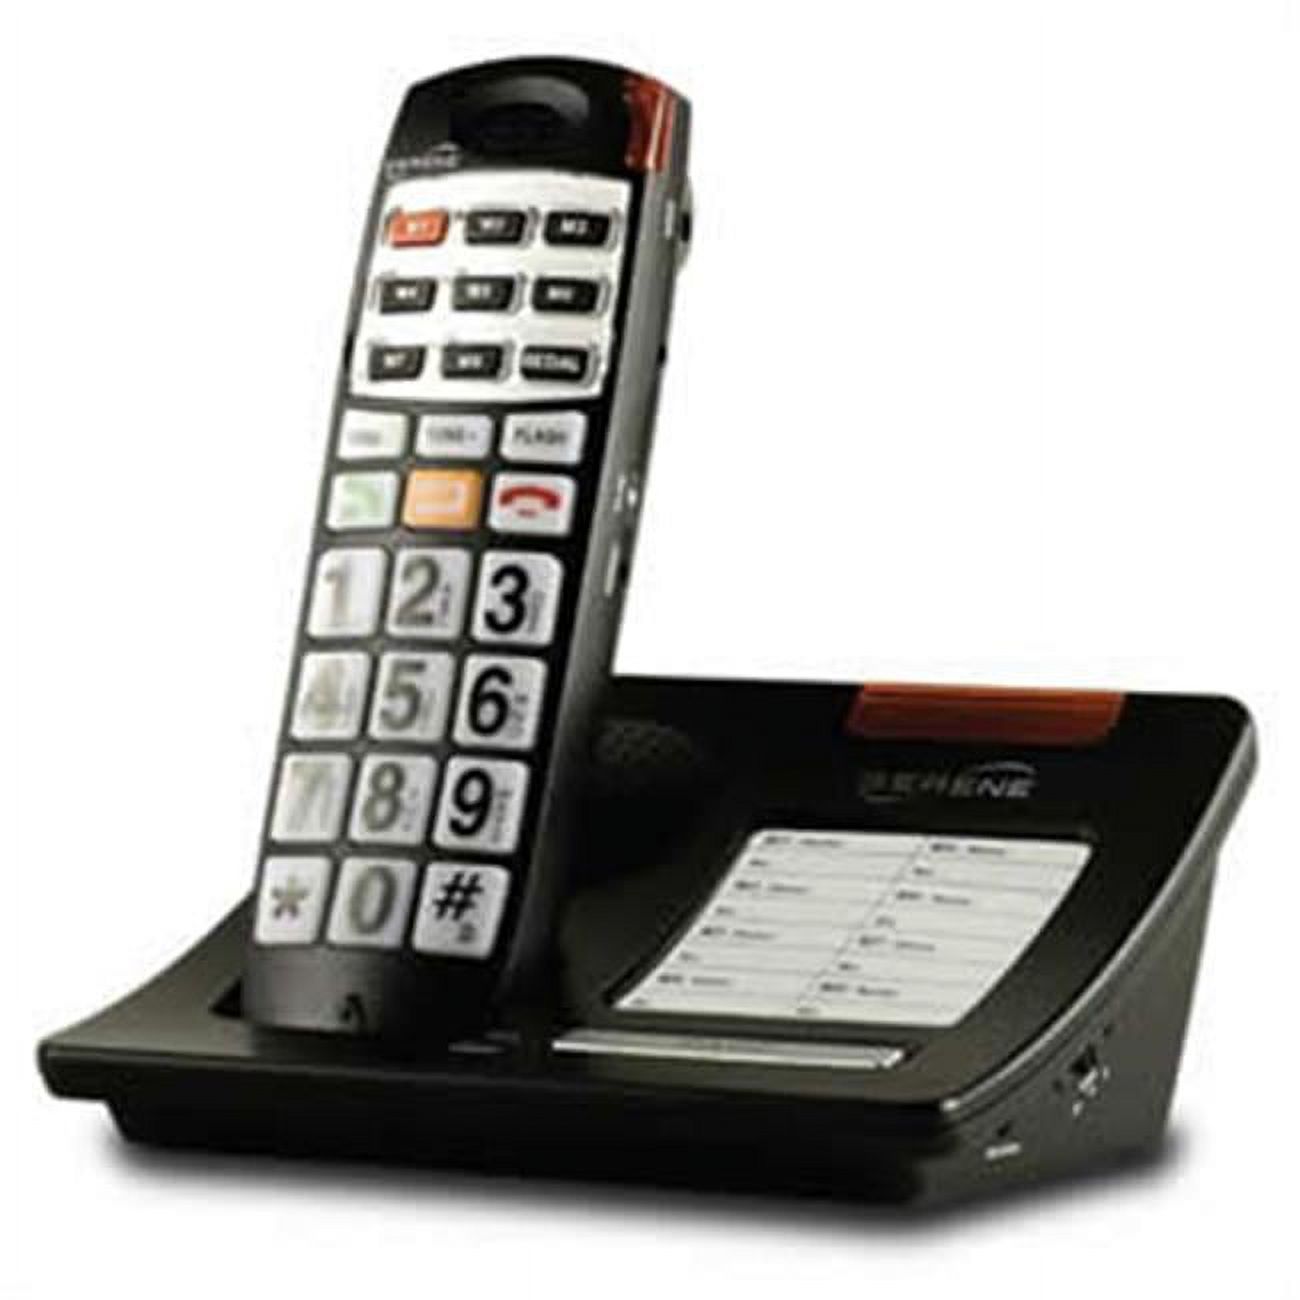 Serene Innovations CL30 DECT Cordless Phone - image 1 of 2